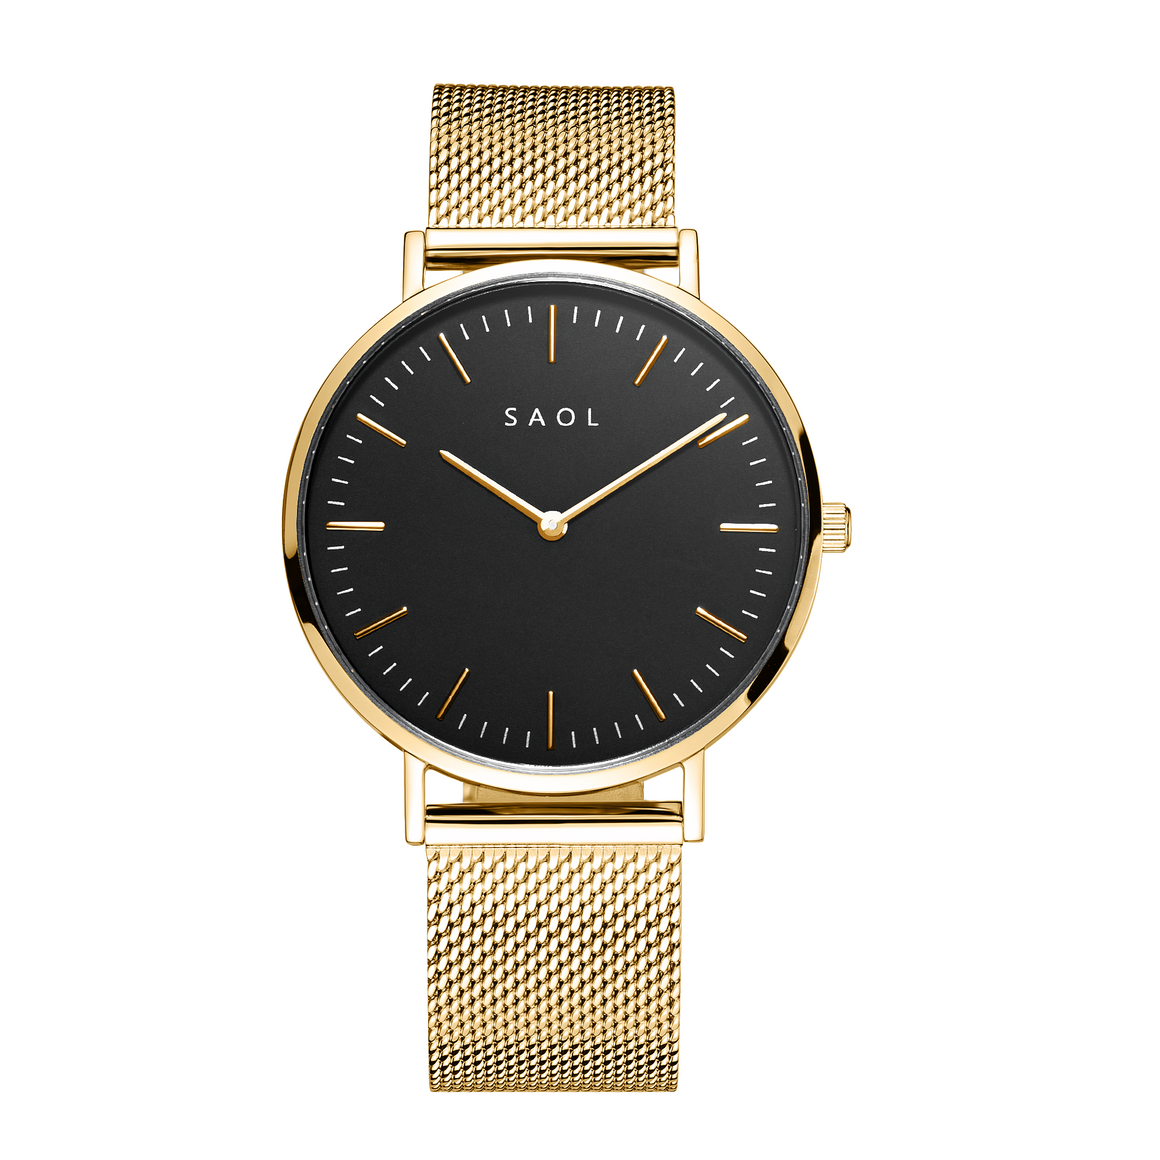 SAOL Watches | Watches For The Way You Live